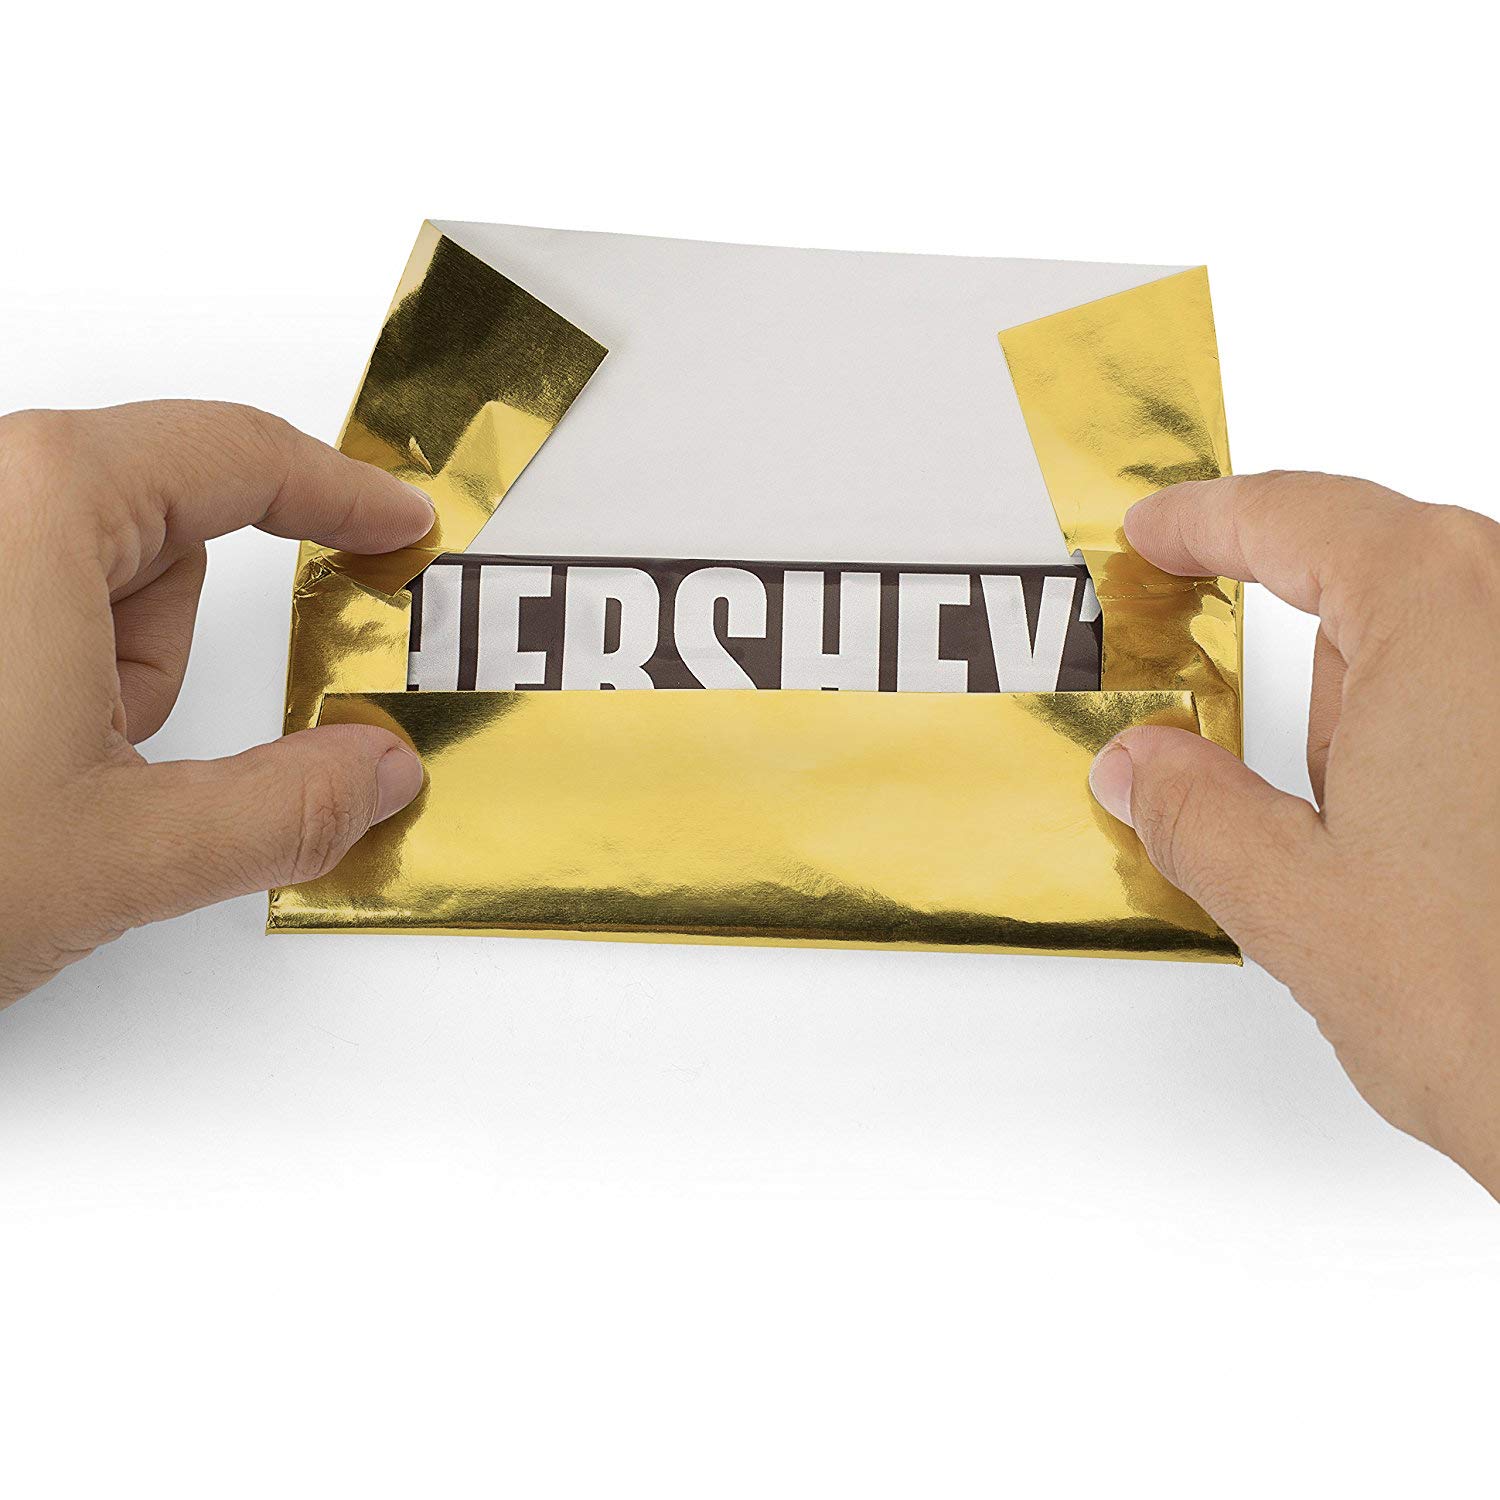 Book Cover Foil Wrapper - Pack of 100 Candy Bar Wrappers with Thick Paper Backing - Folds and Wraps Well - Best for Wrapping 1.55Oz Hershey/Candies/Chocolate Bars/Gifts - Size 6